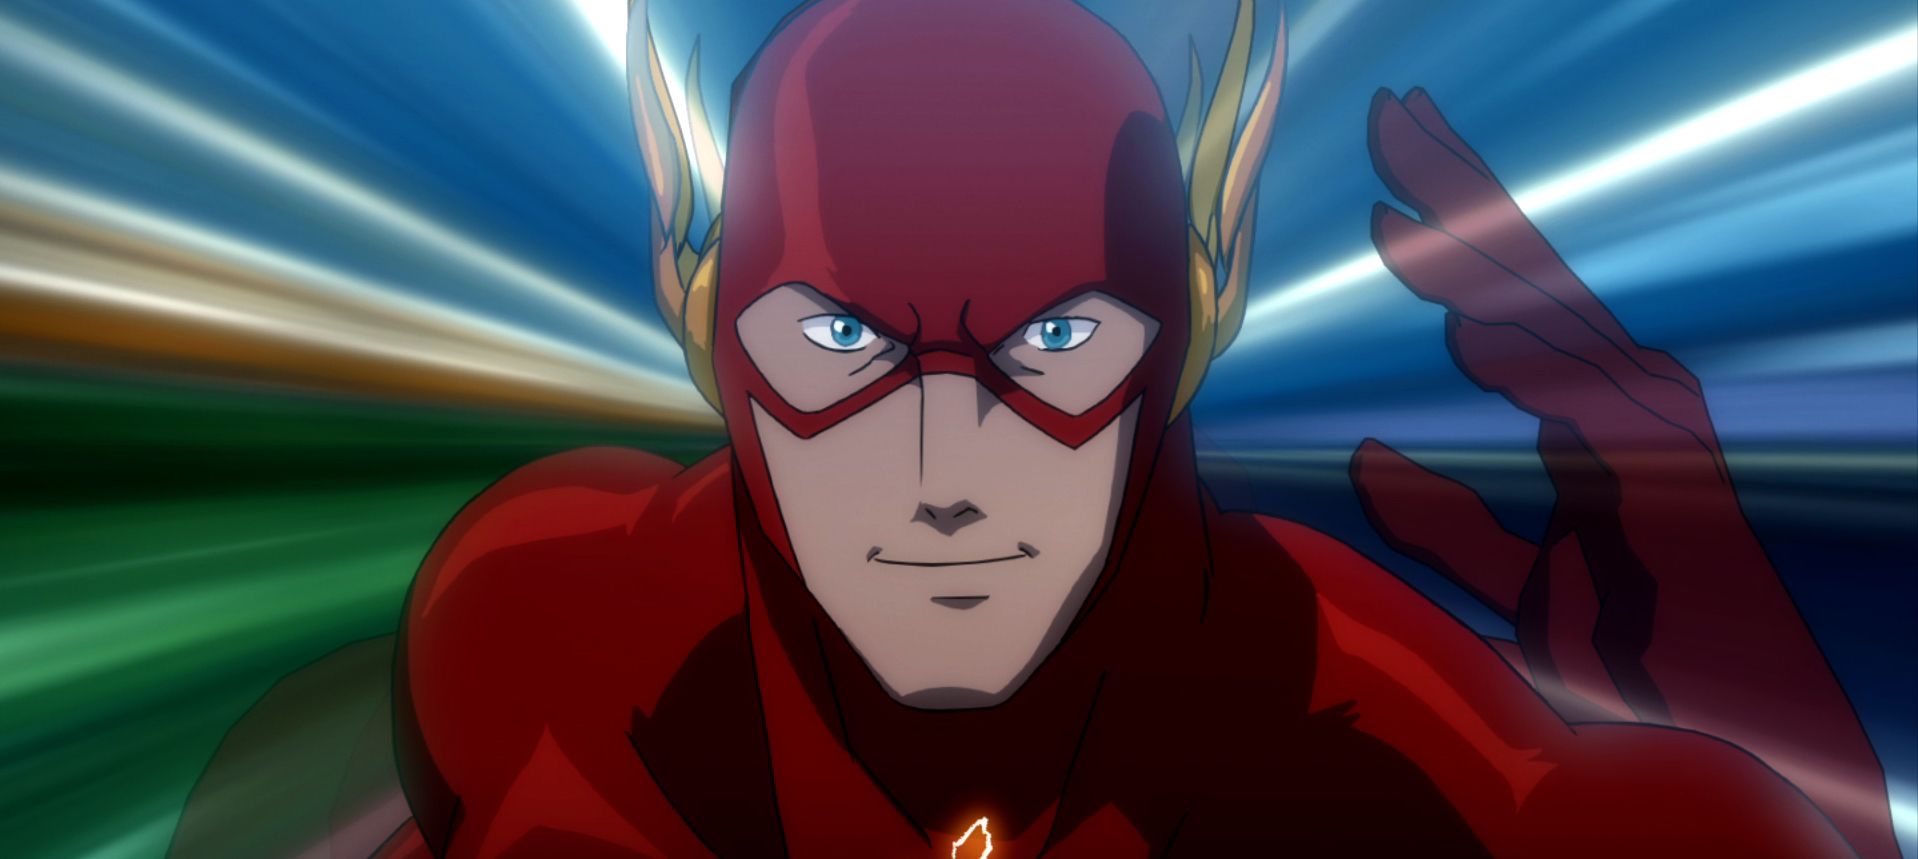 The Flash, One Of The Most Powerful Animated DC Characters